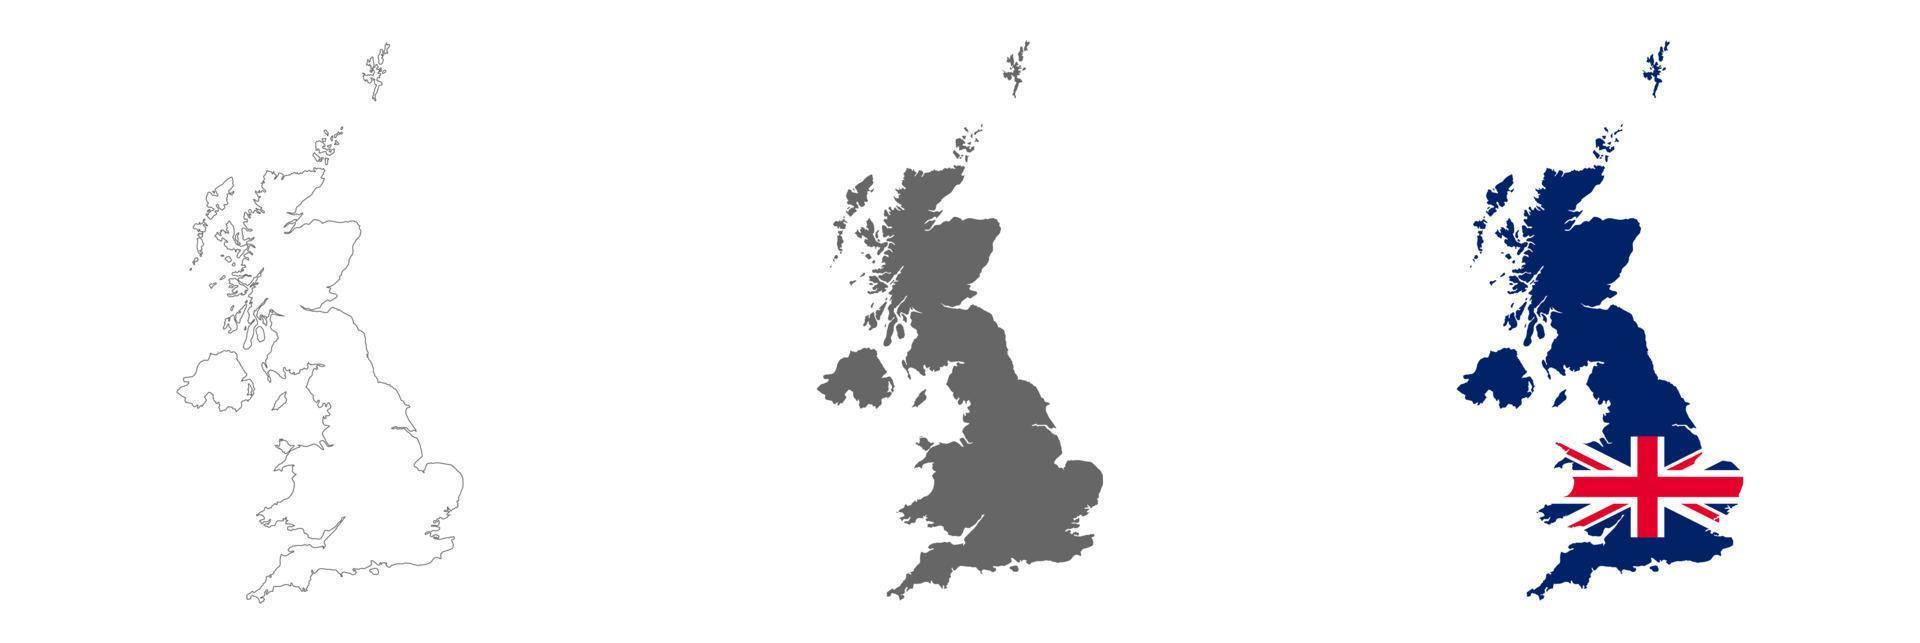 Highly detailed United Kingdom map with borders isolated on background vector